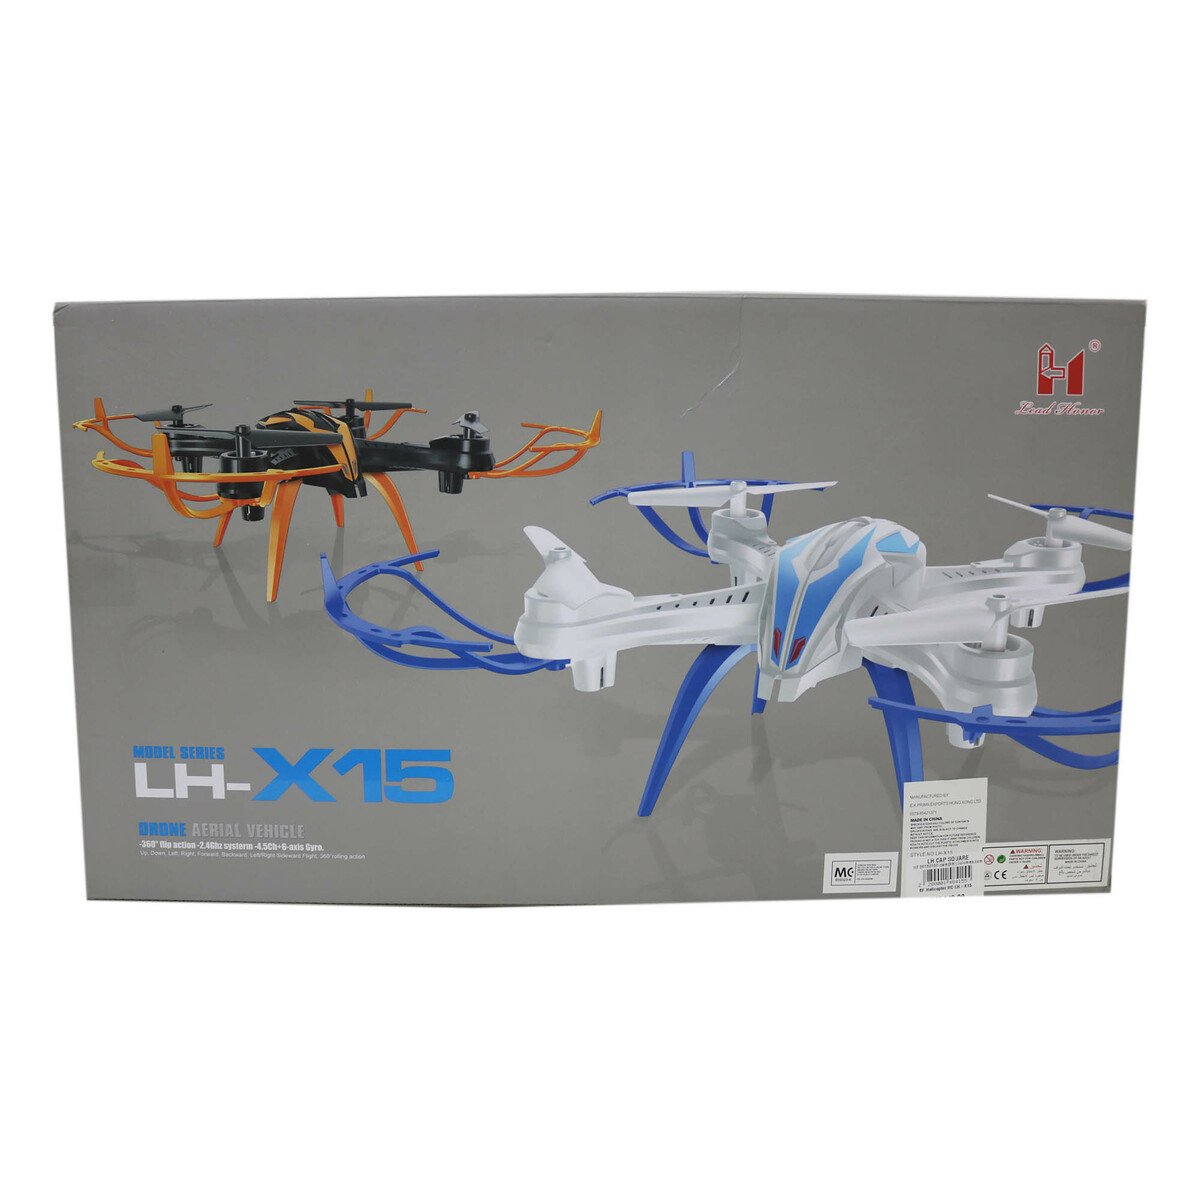 Skid Fusion Helicopter Remote Control LH-X15